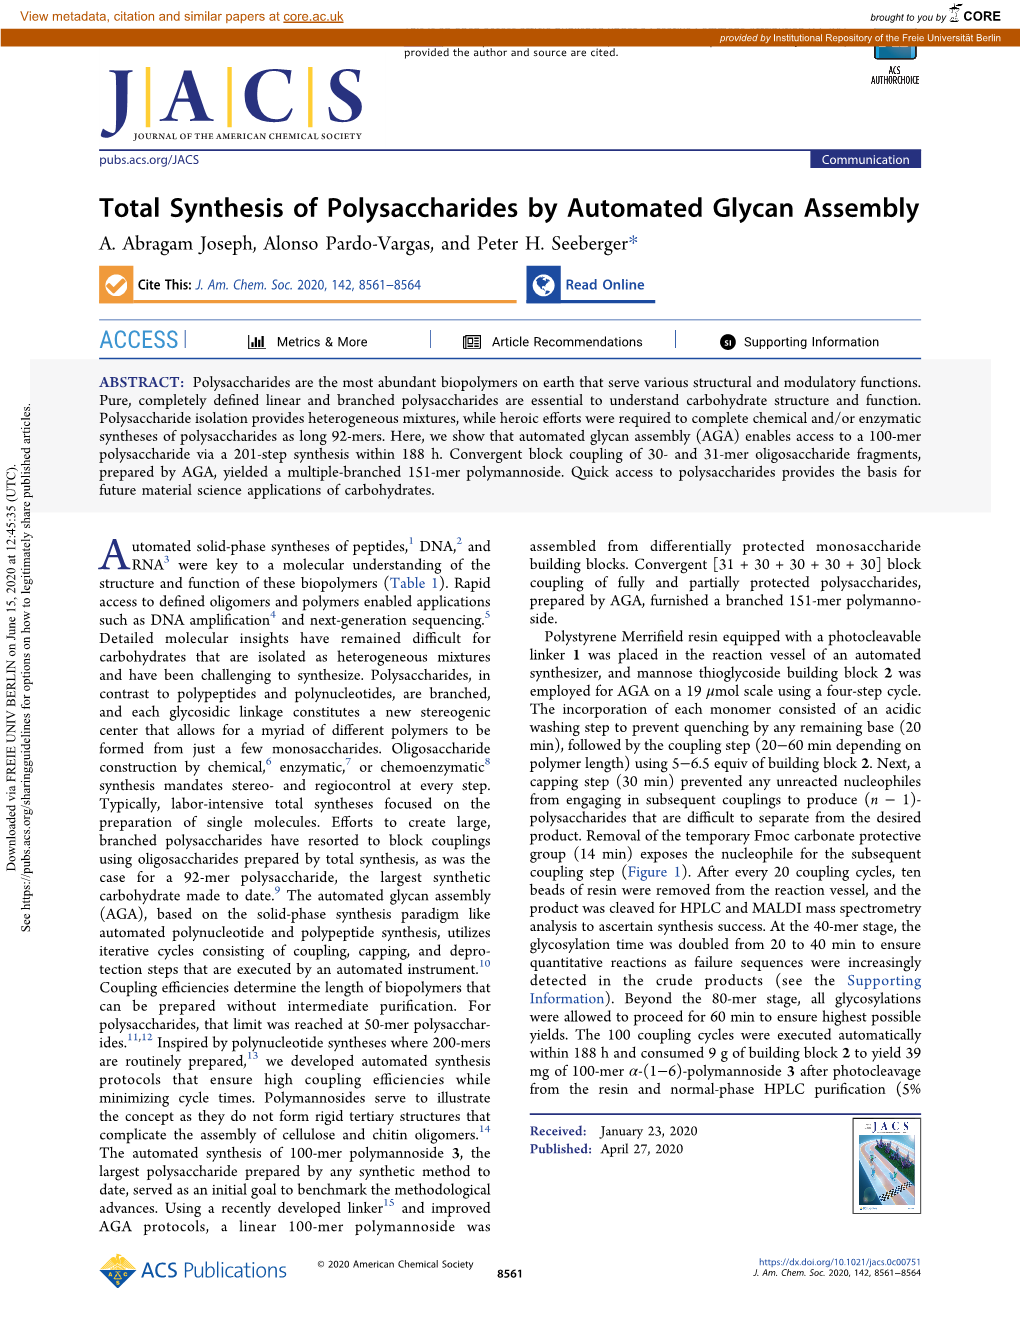 Total Synthesis of Polysaccharides by Automated Glycan Assembly A